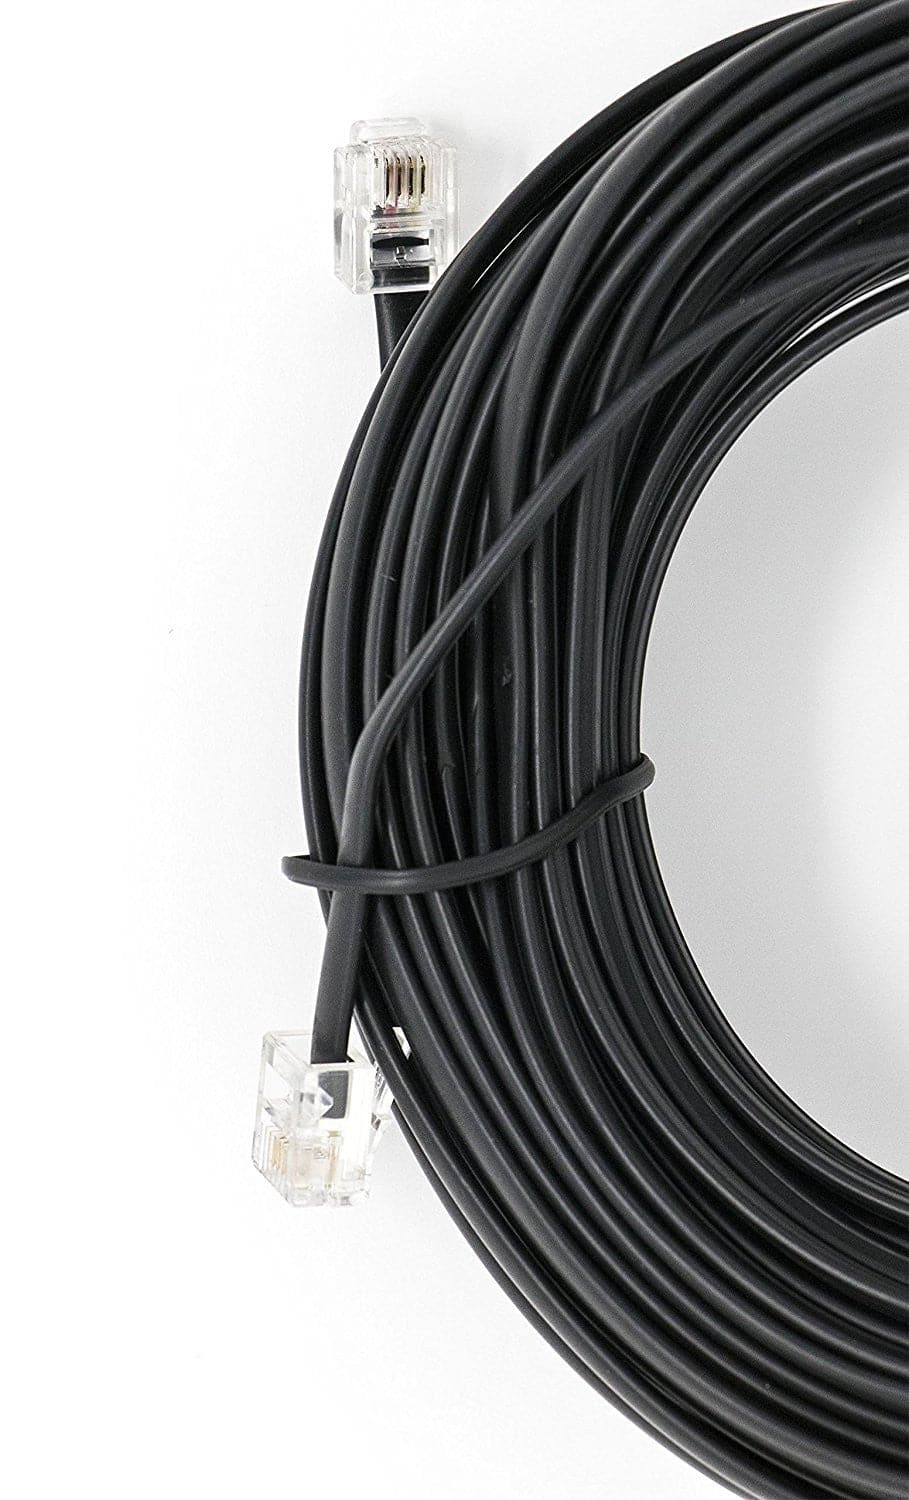 Black 50 FT. Phone Telephone Extension Cord Cable Line Wire - iSoHo Phone Accessories - USA Trading Depot, LLC